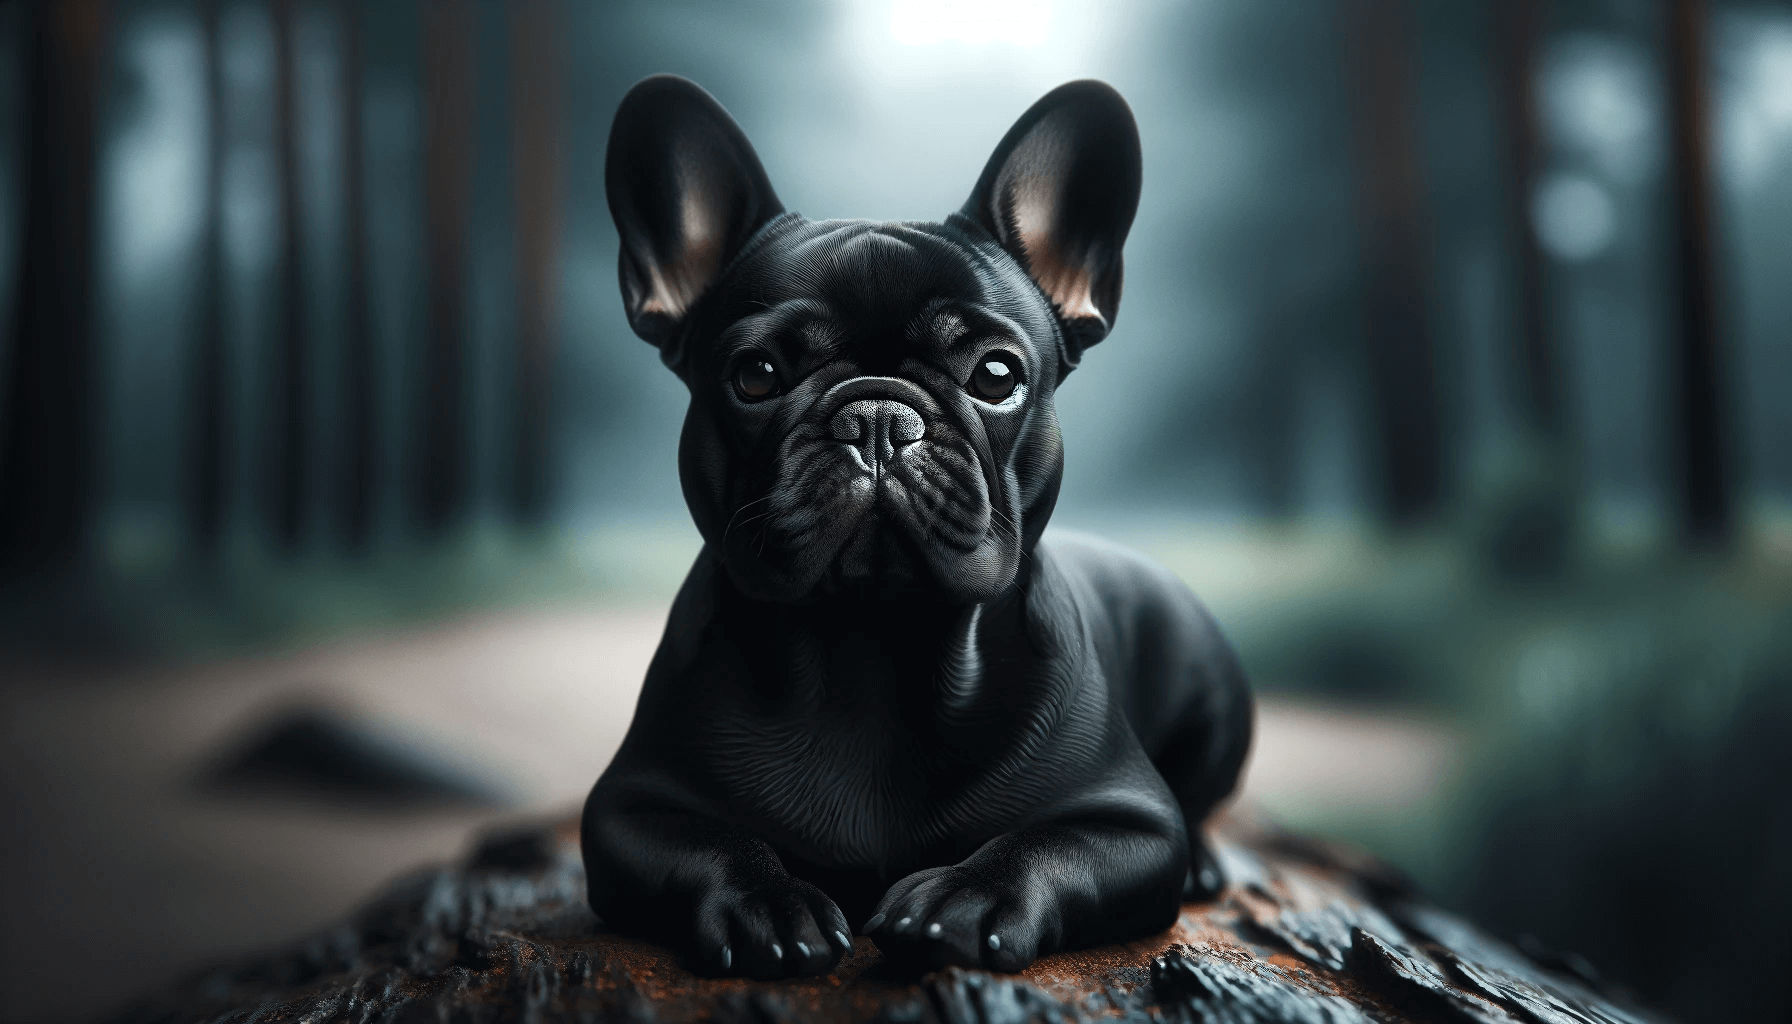 Unique Features of Black French Bulldogs